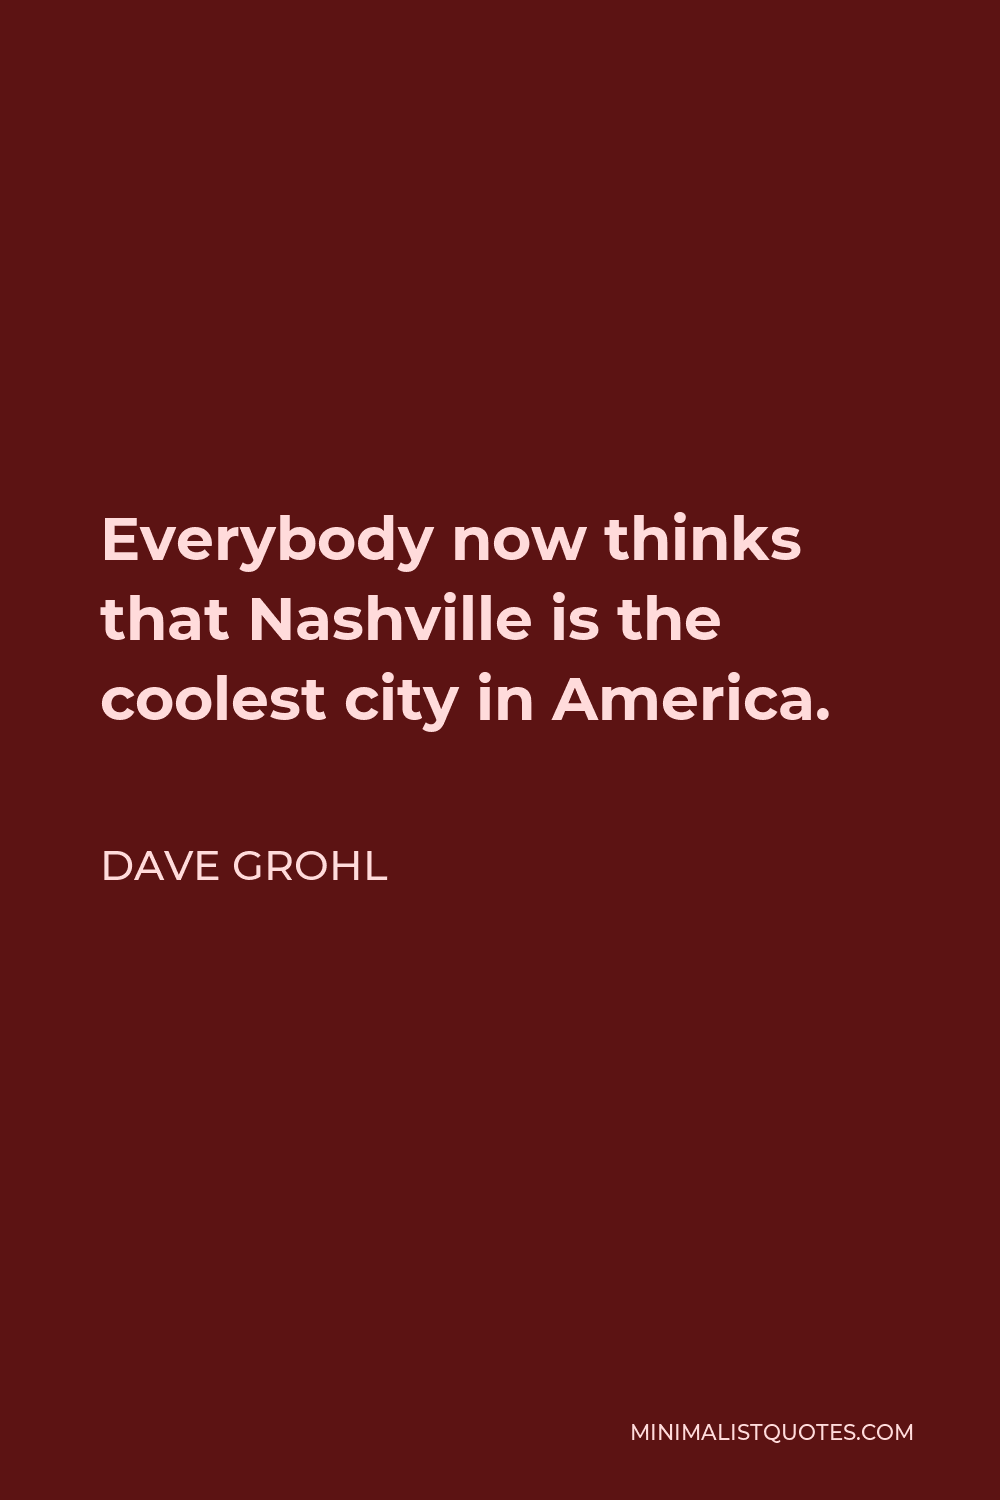 Dave Grohl Quote - Everybody now thinks that Nashville is the coolest city in America.